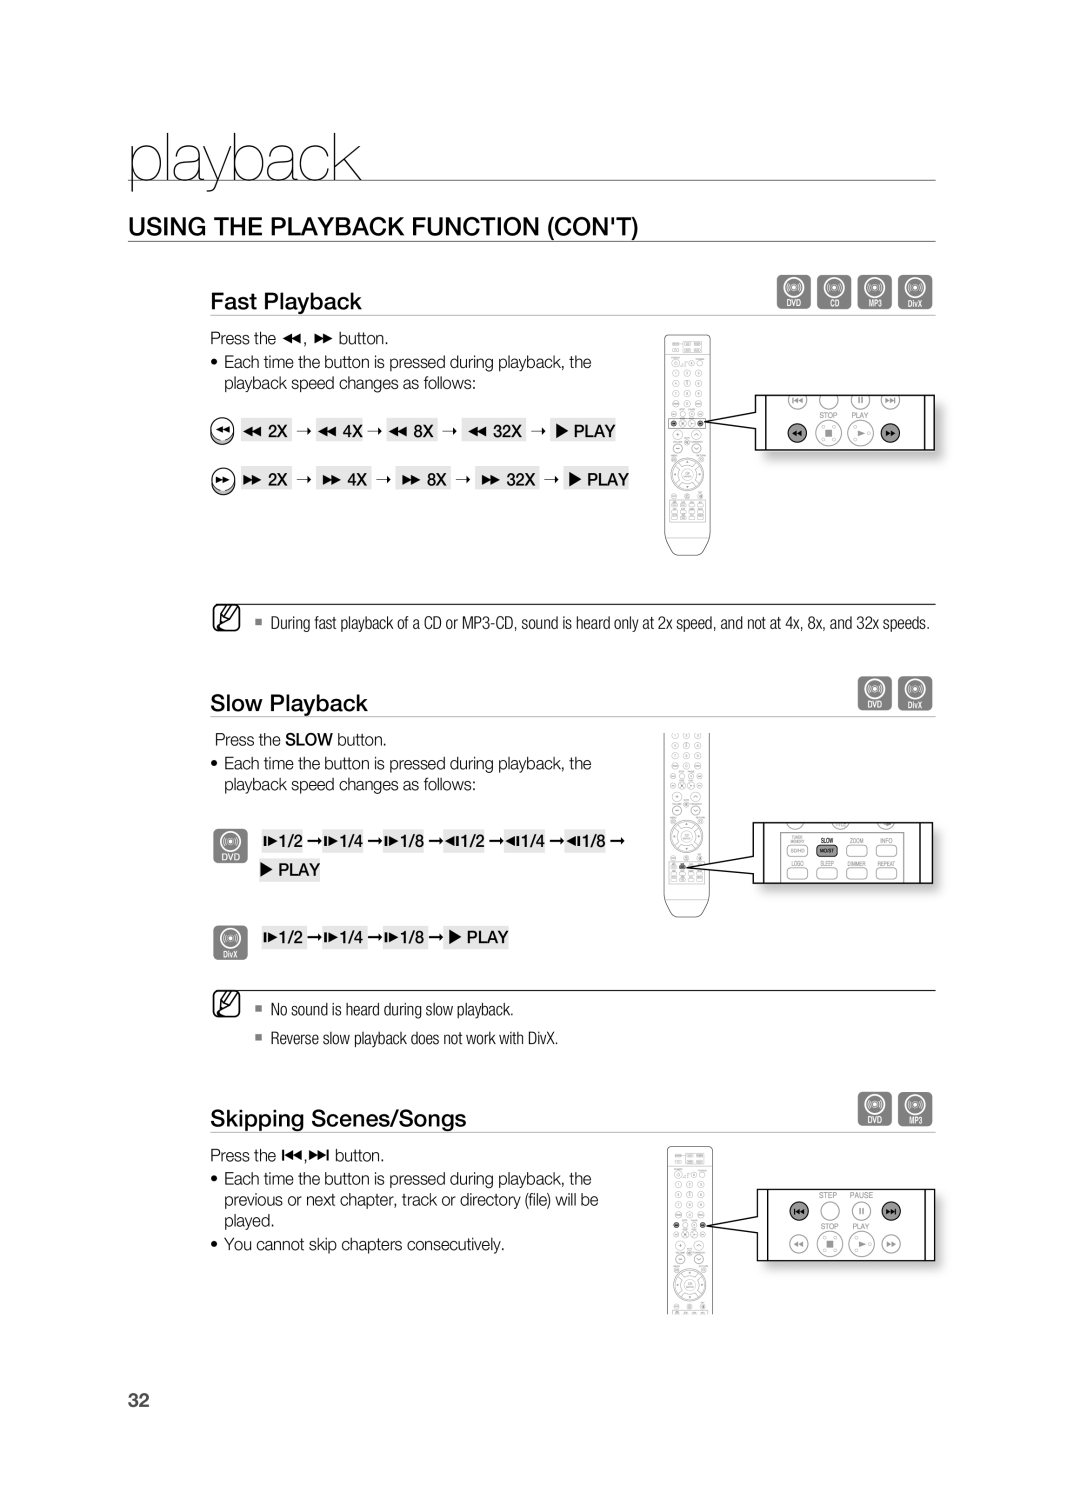 Samsung HT-X810 user manual USING THE PlAYBACK FUNCTION CONT, Slow Playback, Skipping Scenes/Songs, playback, Fast Playback 